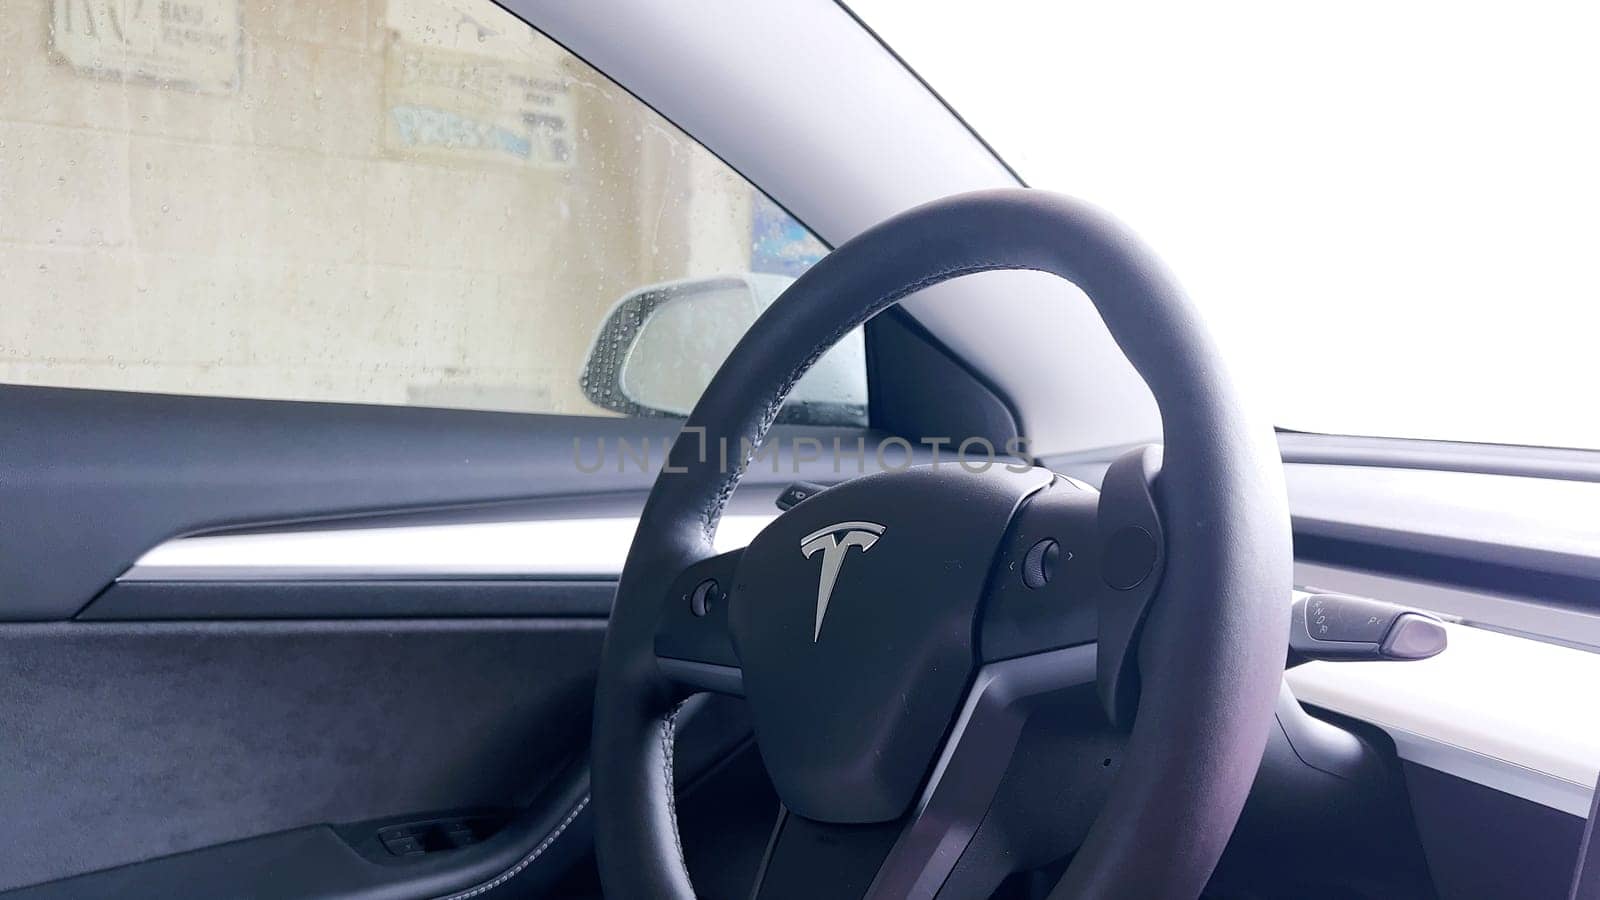 Denver, Colorado, USA-February 17, 2024-The interior of a Tesla Model 3 is shown from the driver’s perspective during a car wash, highlighting the vehicle’s modern design and dashboard display while water streams down the windshield.